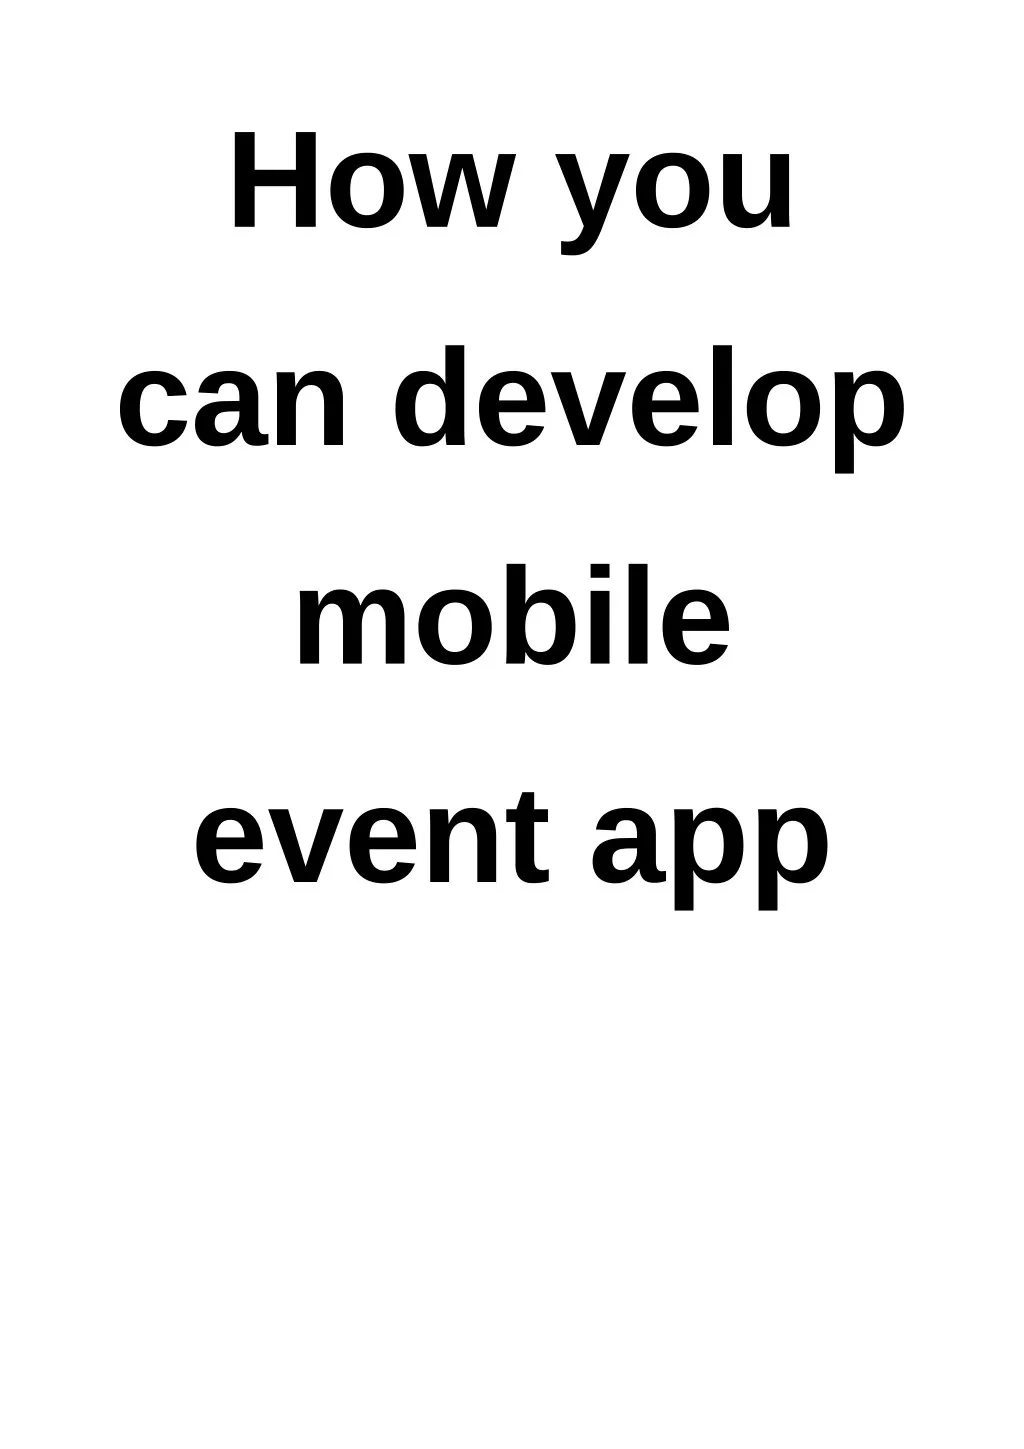 how you can develop mobile event app